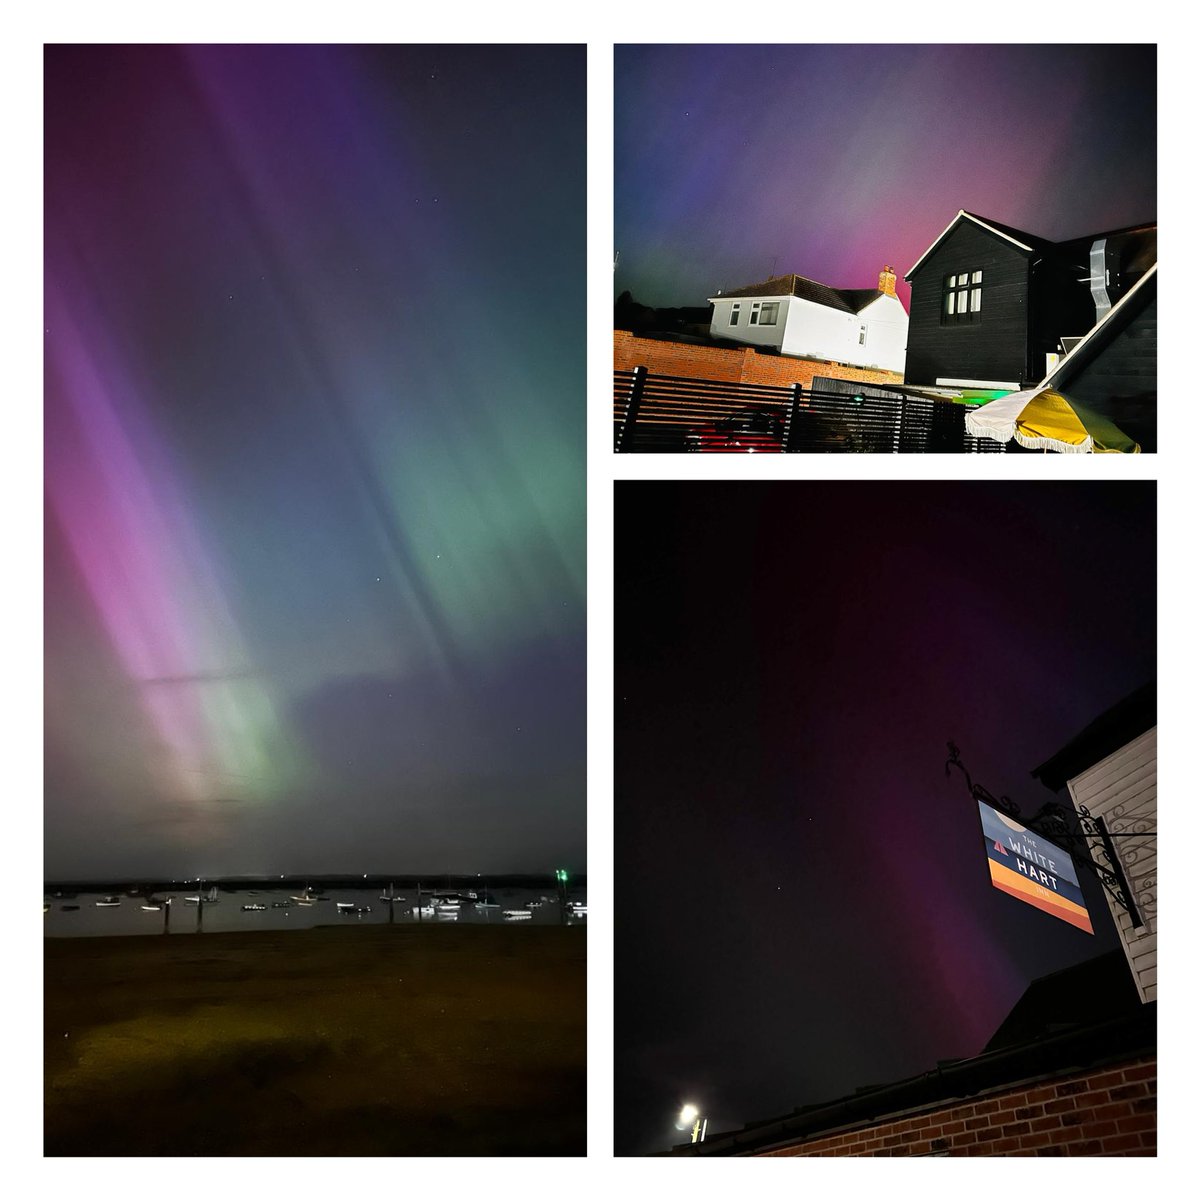 Norther lights over Mersea - WOW